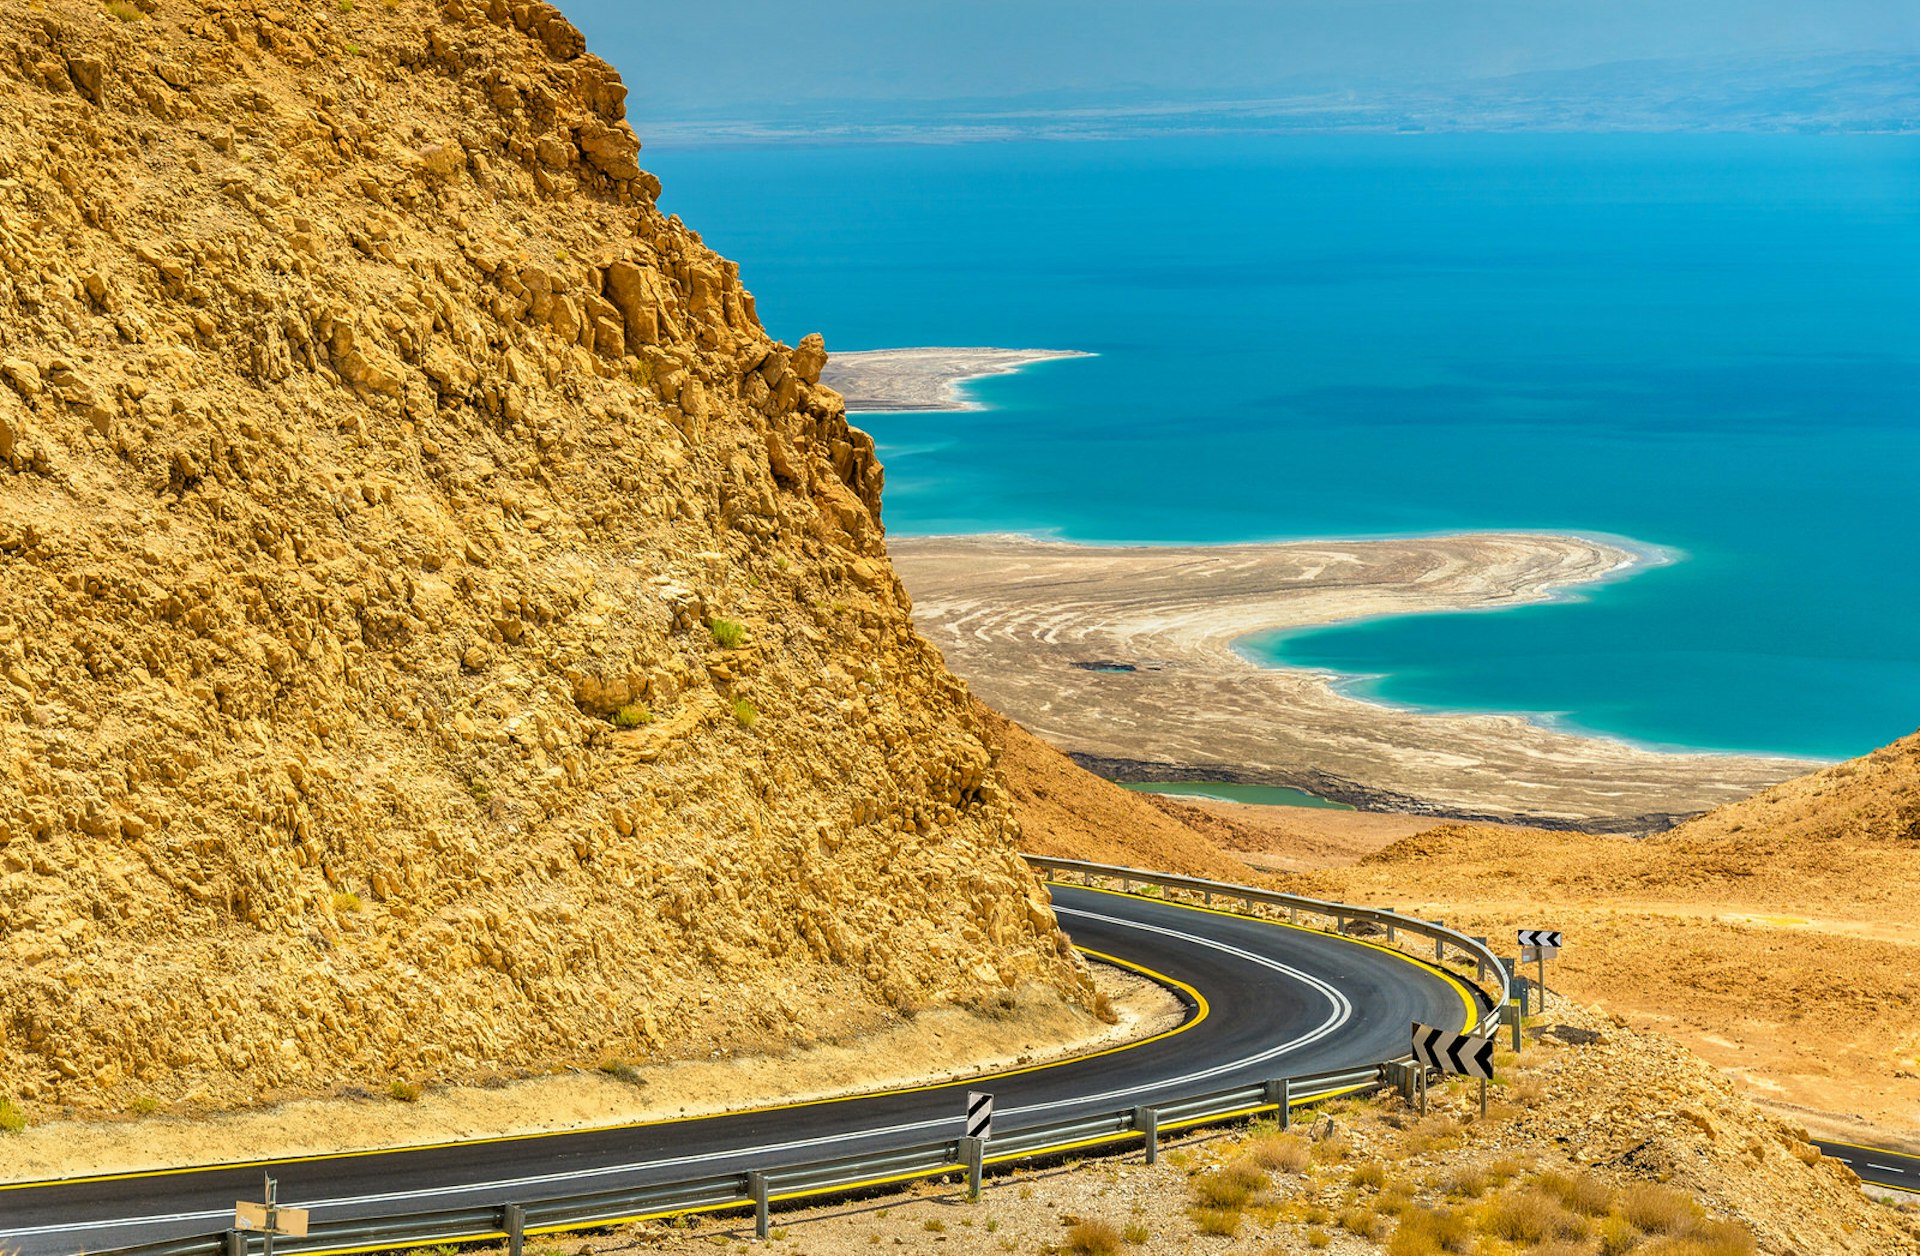 Road in the Judean desert rounds a bend that hugs an orange cliff and leads to the Dead Sea in the distance below..